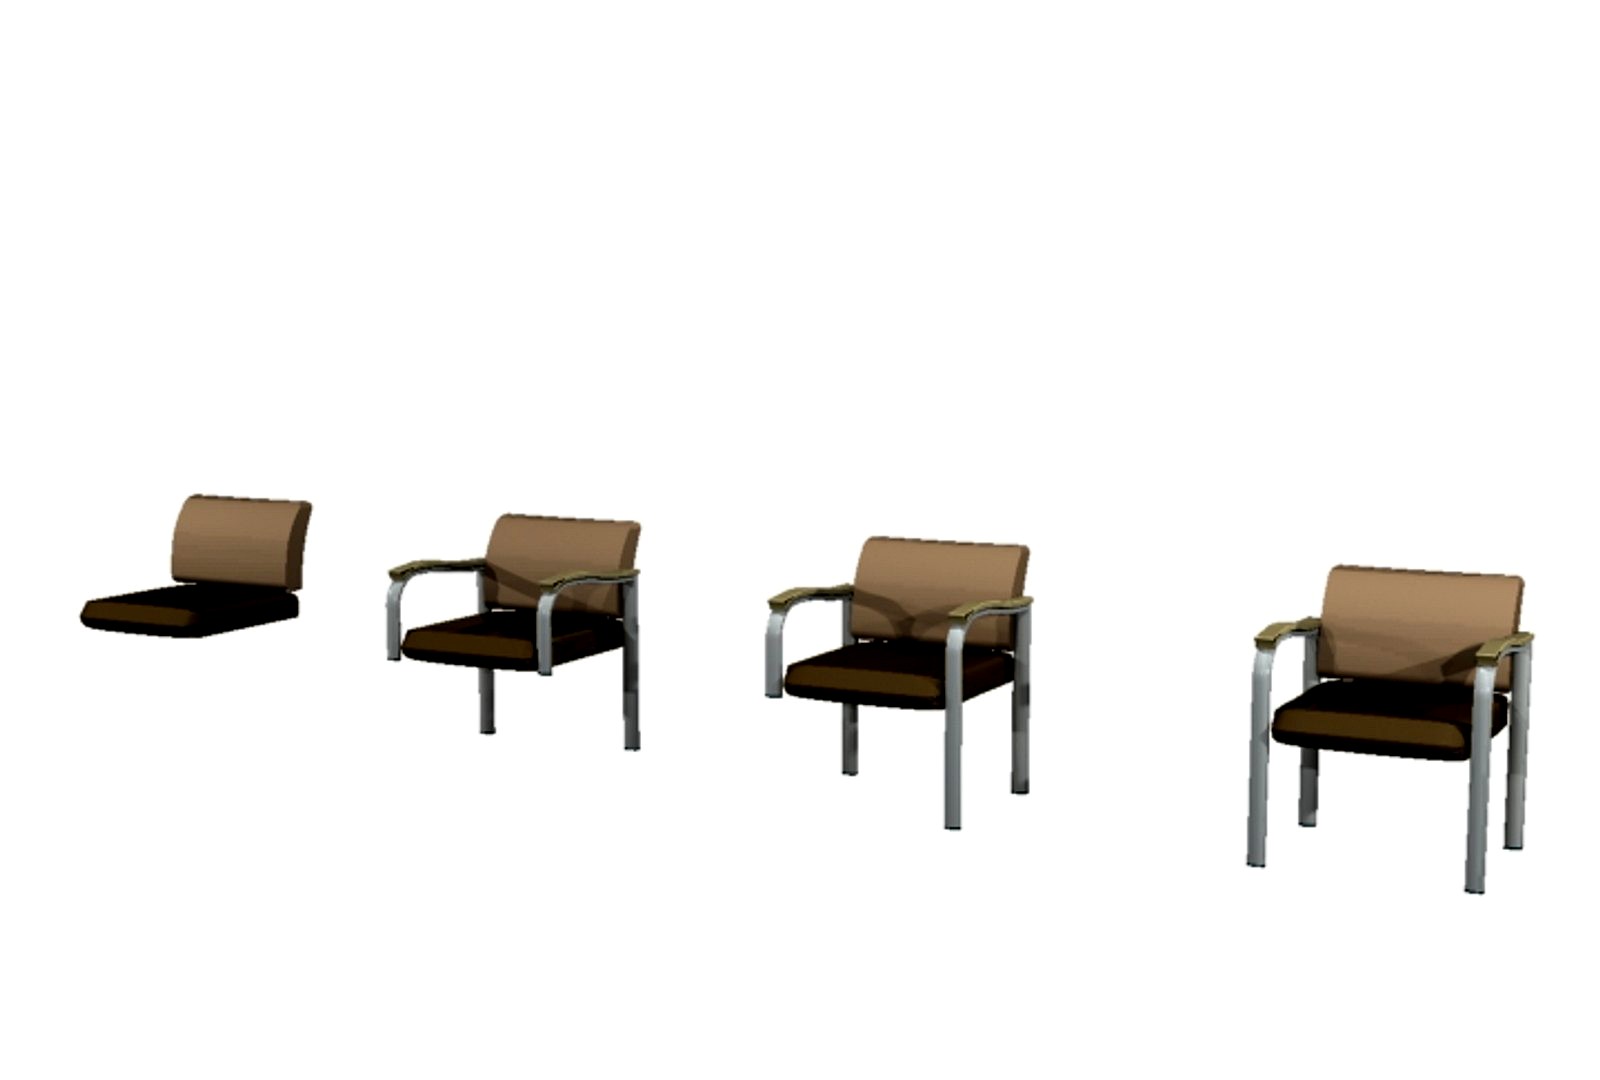 Reliant multi chairs